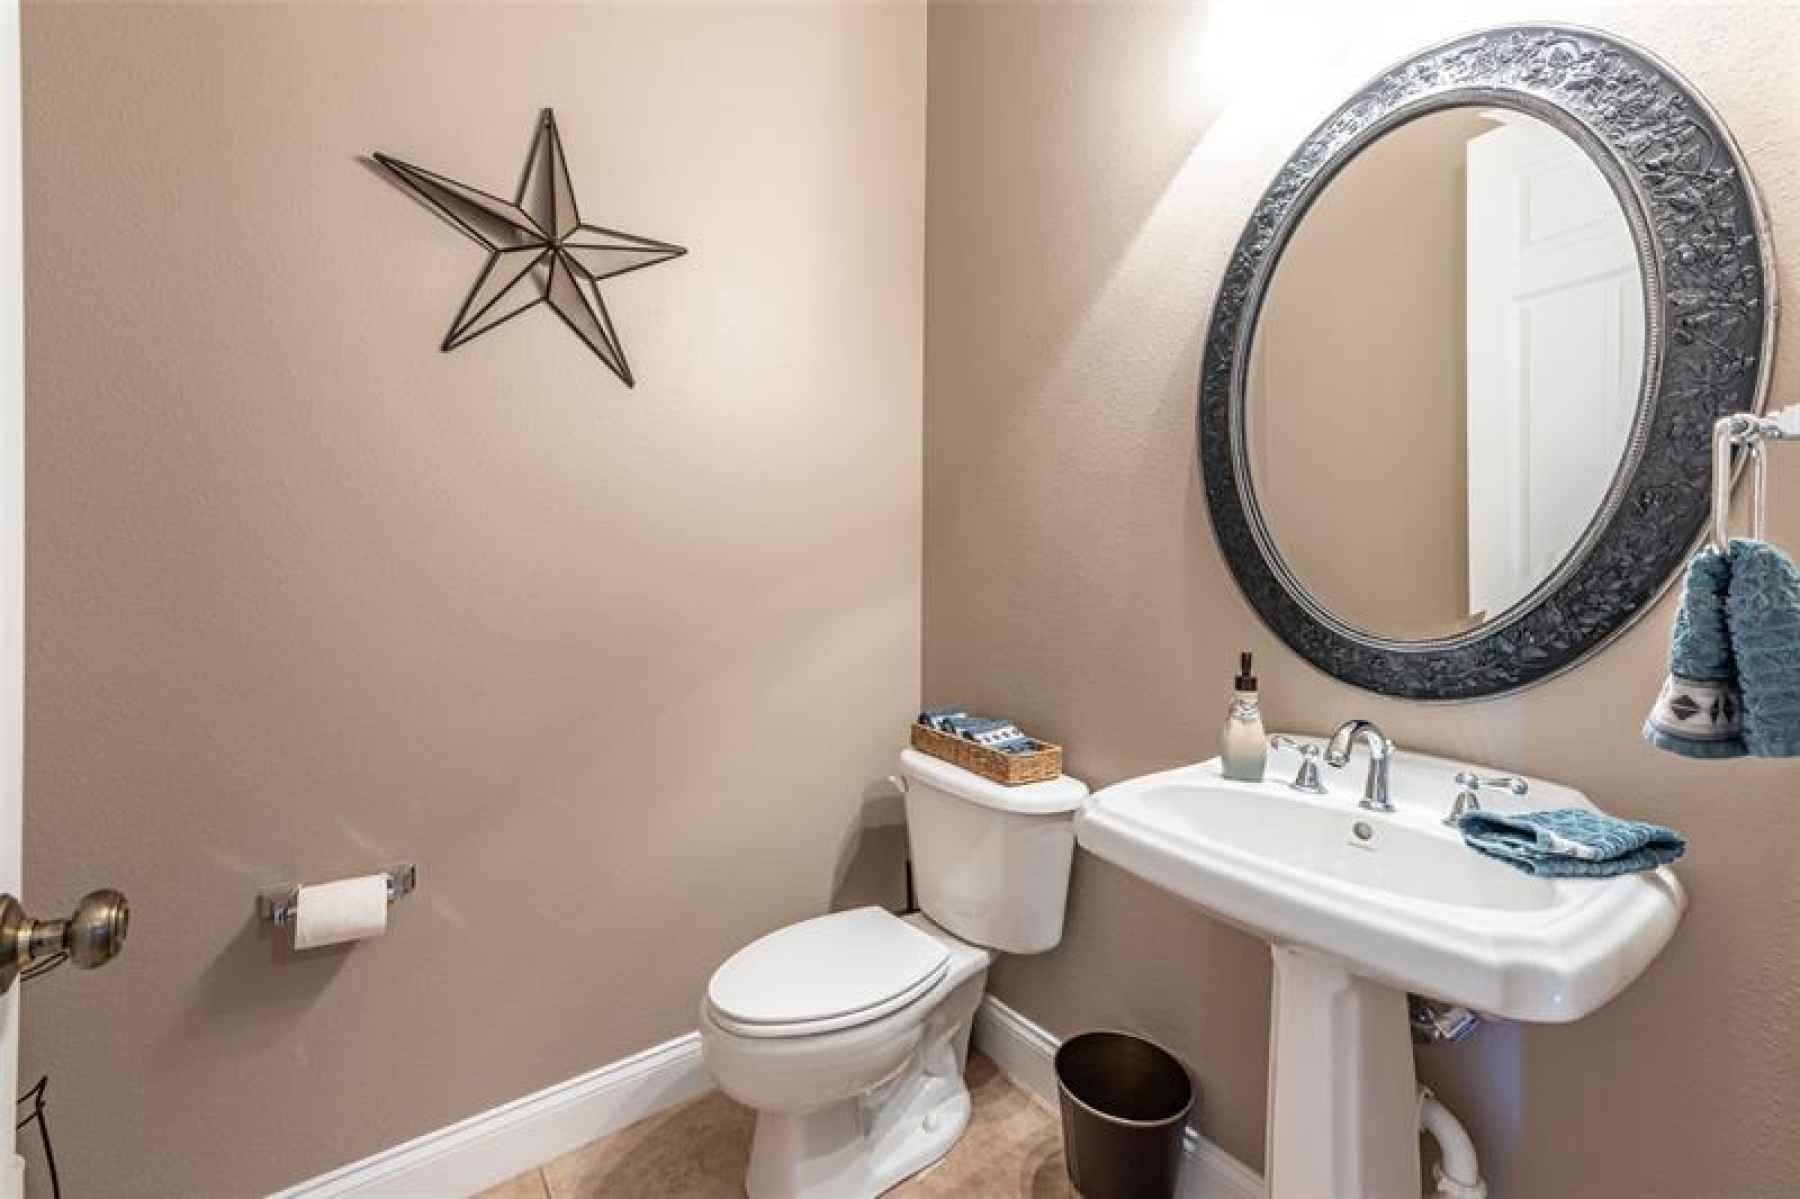 Guest half bath off foyer, close to home office and family room.